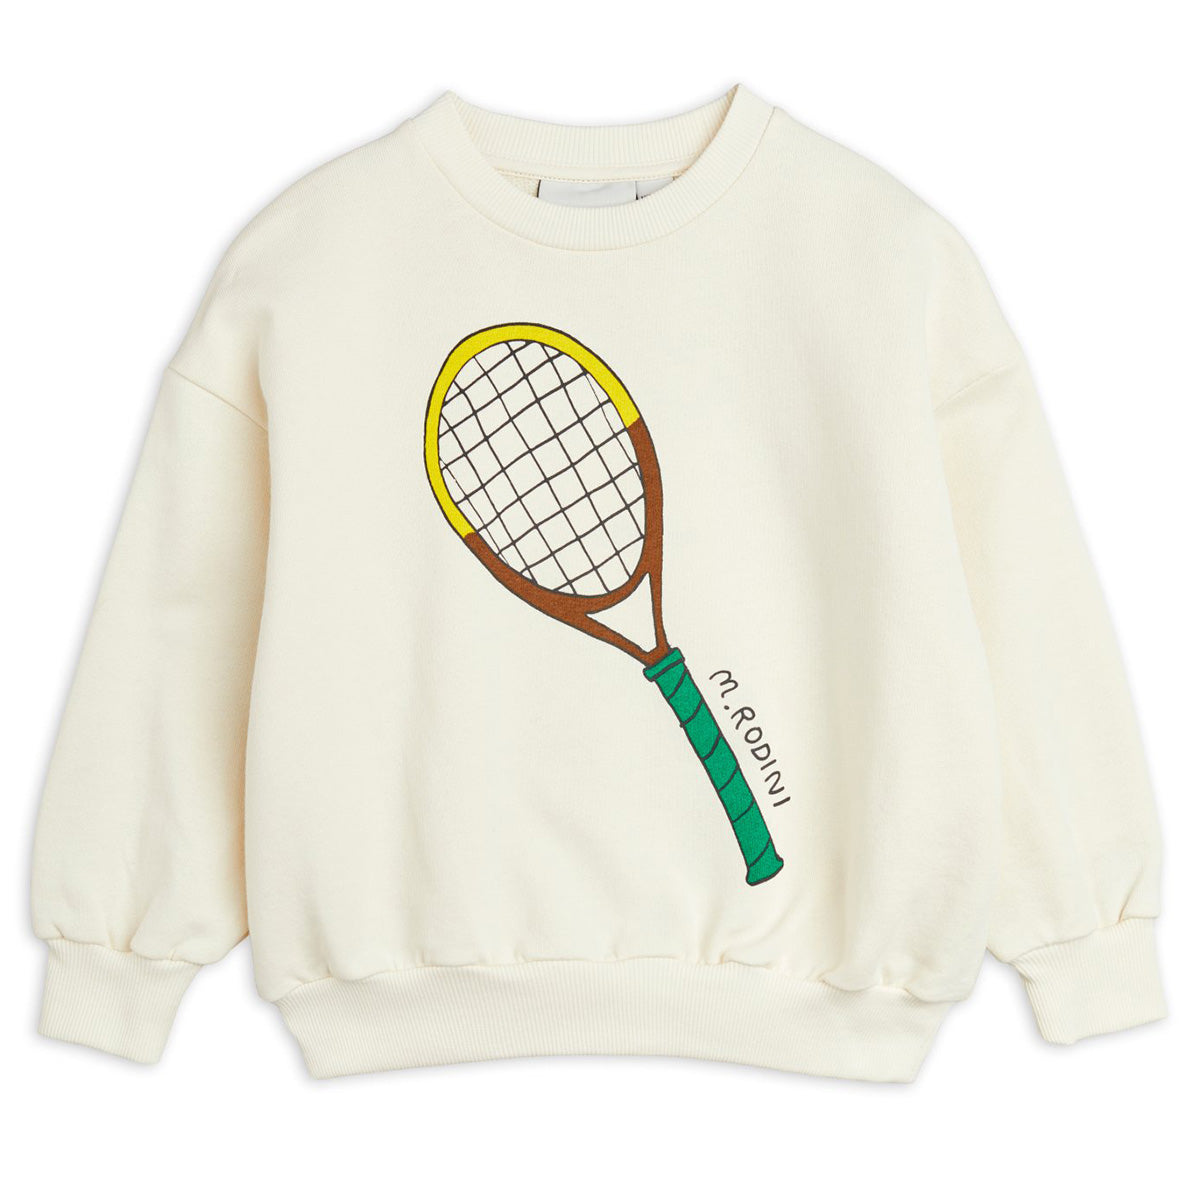 The Tennis Sweatshirt from Mini Rodini. Tennis print, Ribbed collar, Dropped shoulders for a relaxed fit